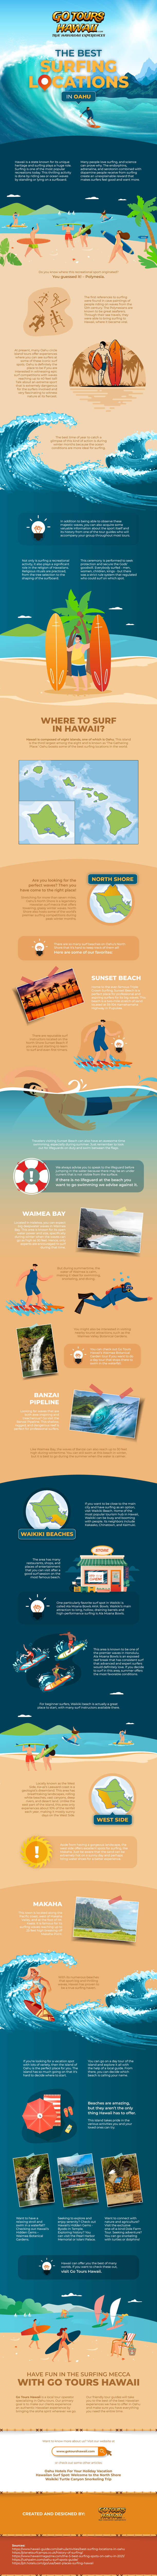 The-Best-Surfing-Locations-in-Oahu-Infographic-image-DSJbf32